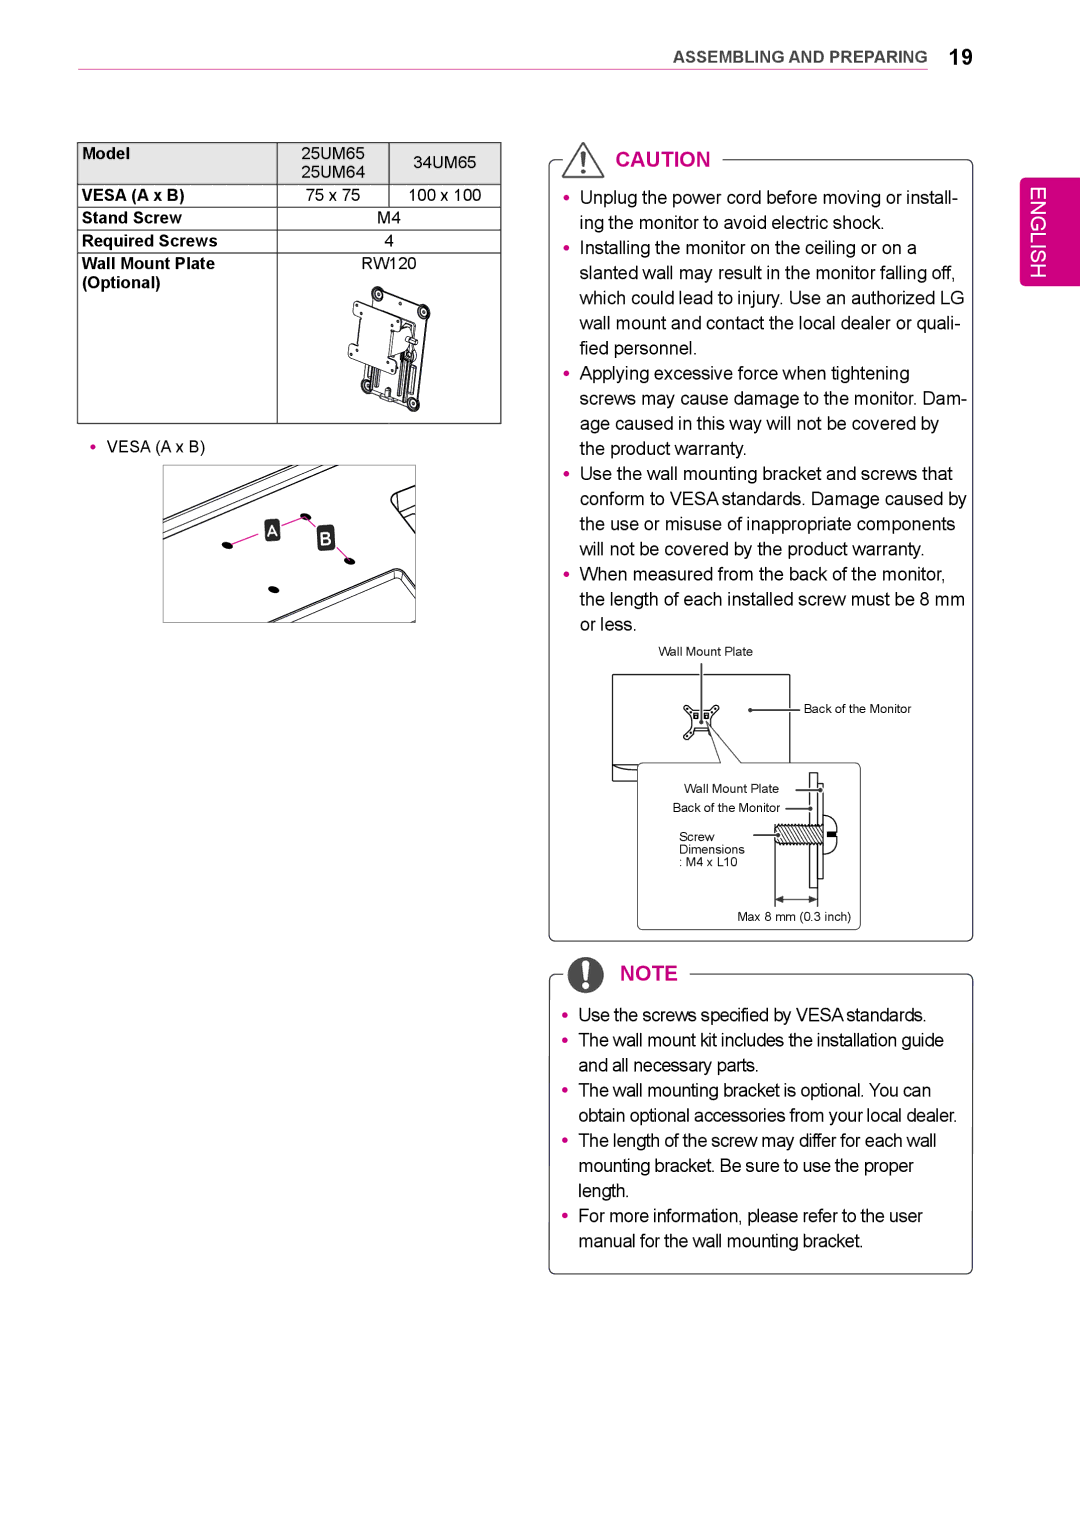 LG Electronics 25UM64-S owner manual All necessary parts 